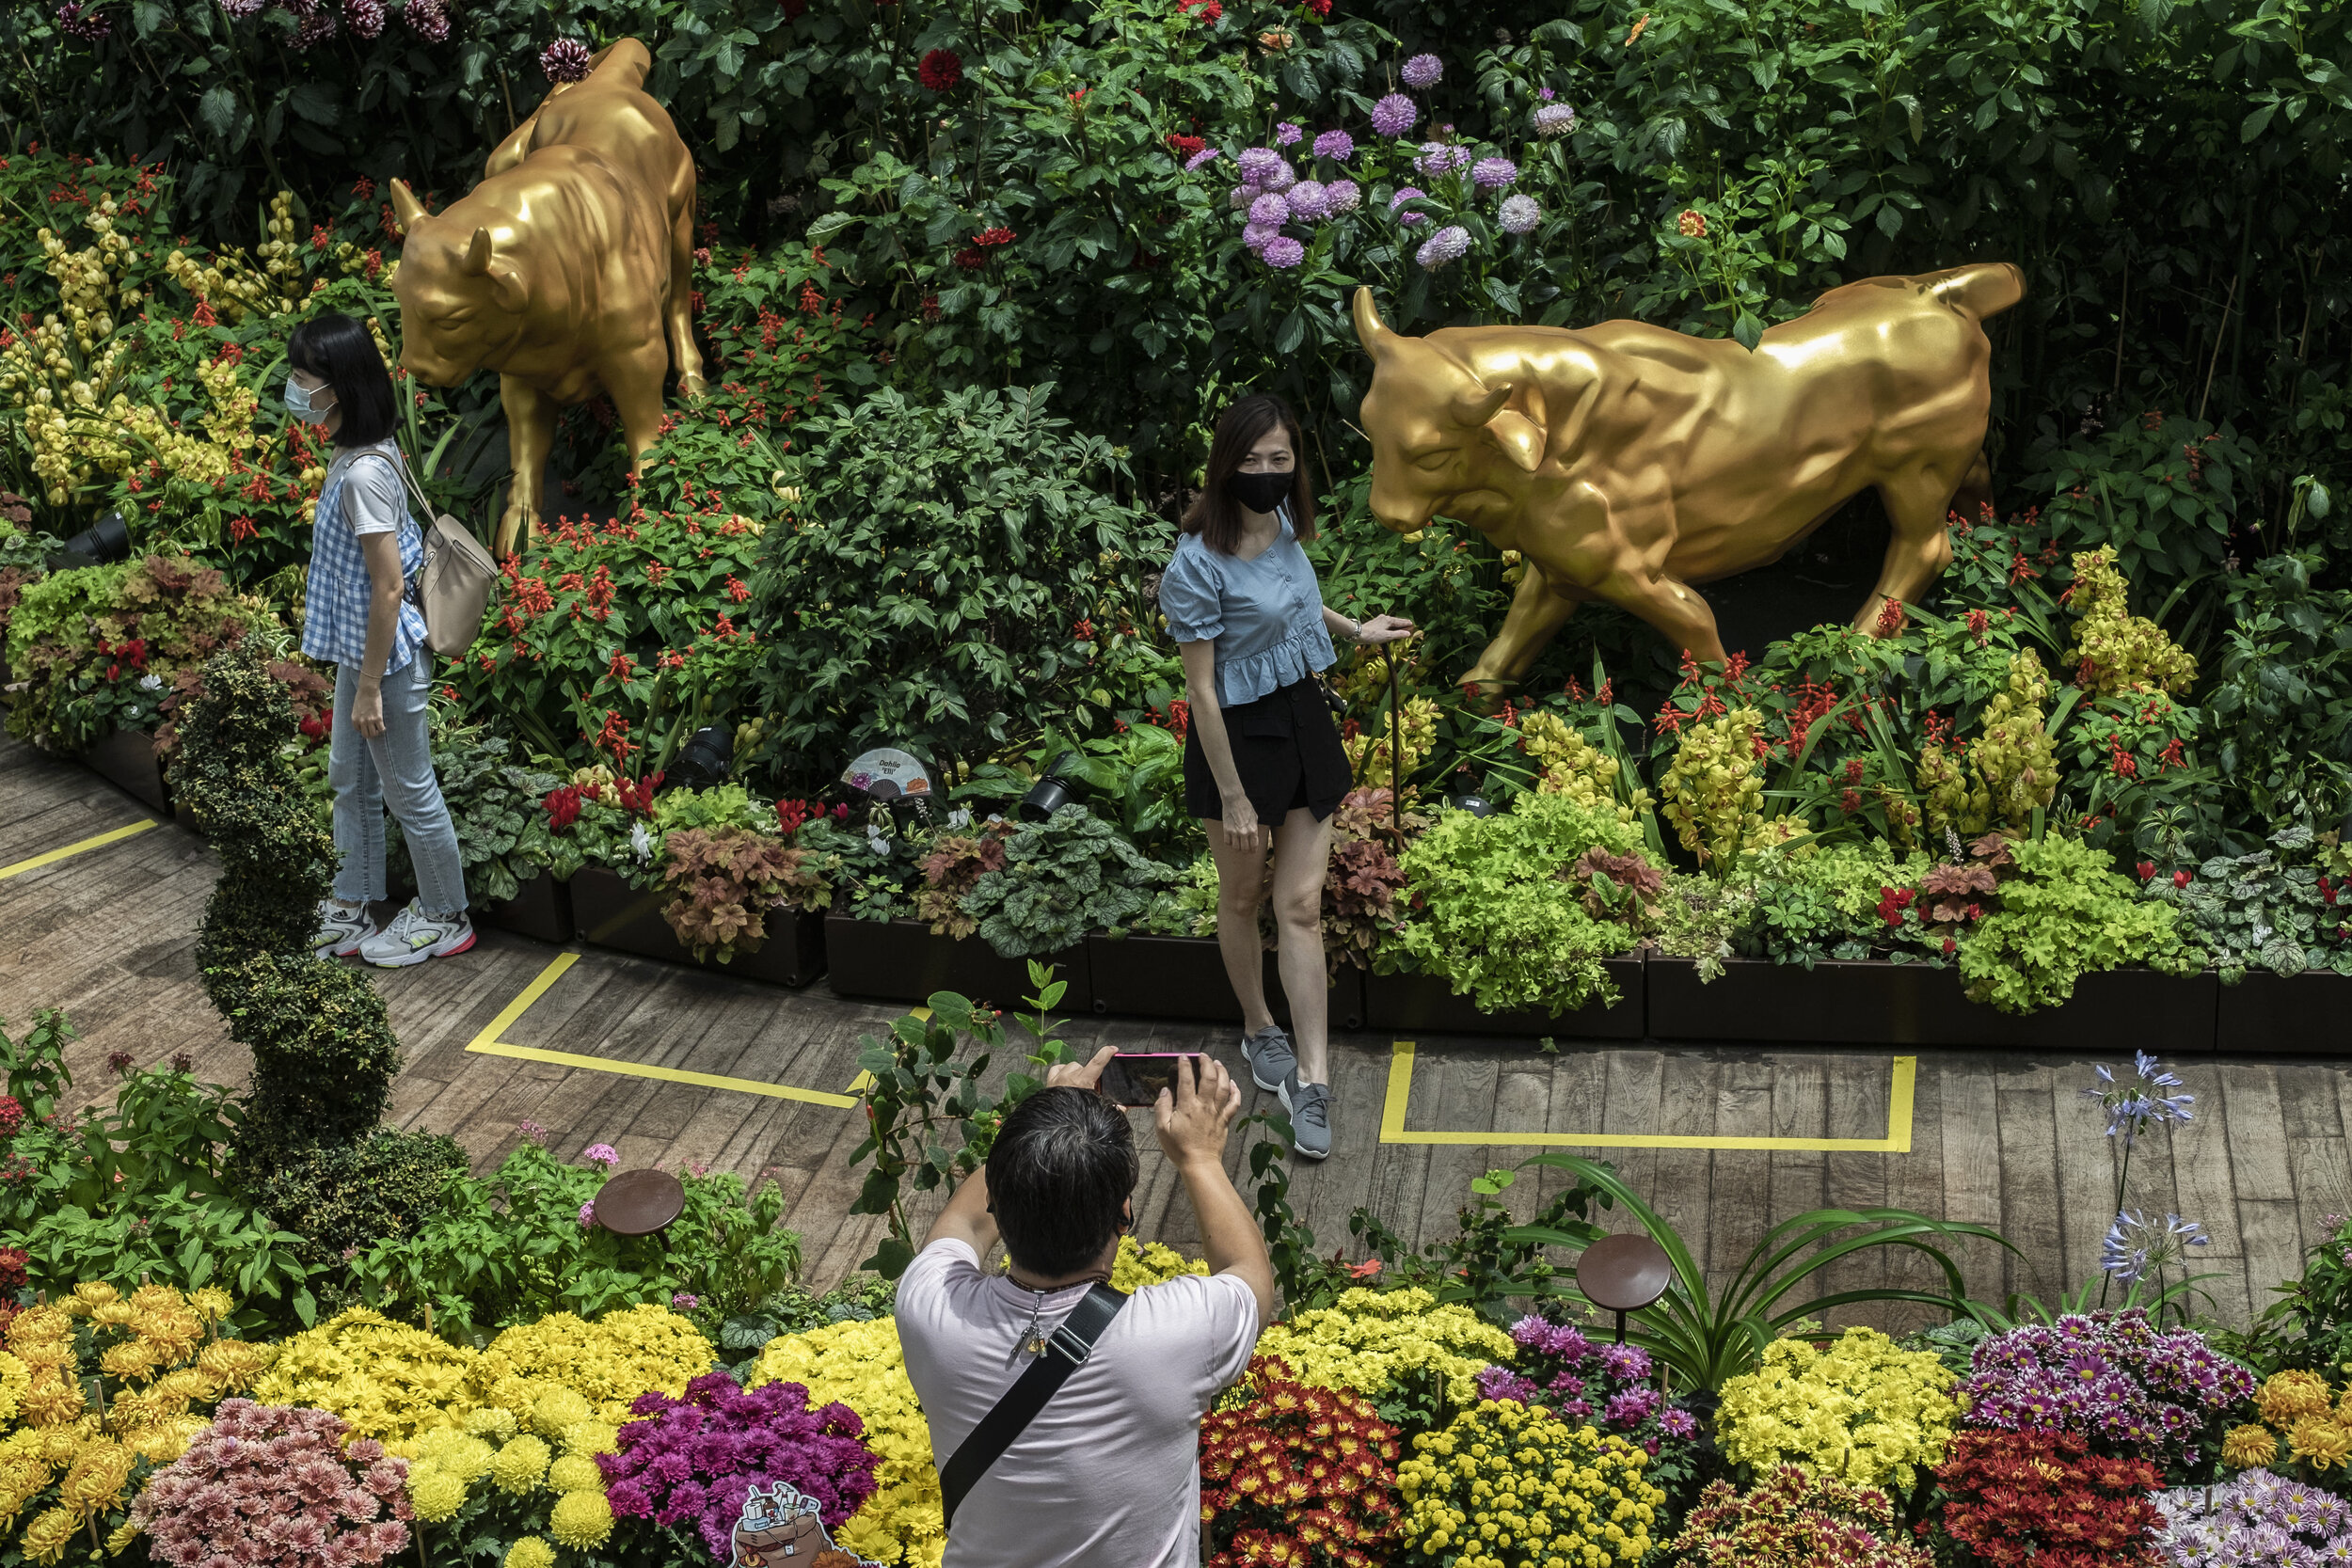  Visitors wearing face masks pose with ox sculptures during the annual Dahlia Dreams floral display ahead of the Chinese Lunar New Year of the Ox, otherwise known as the Spring Festival, at Singapore's Gardens by the Bay, January 31, 2021. REUTERS/Lo